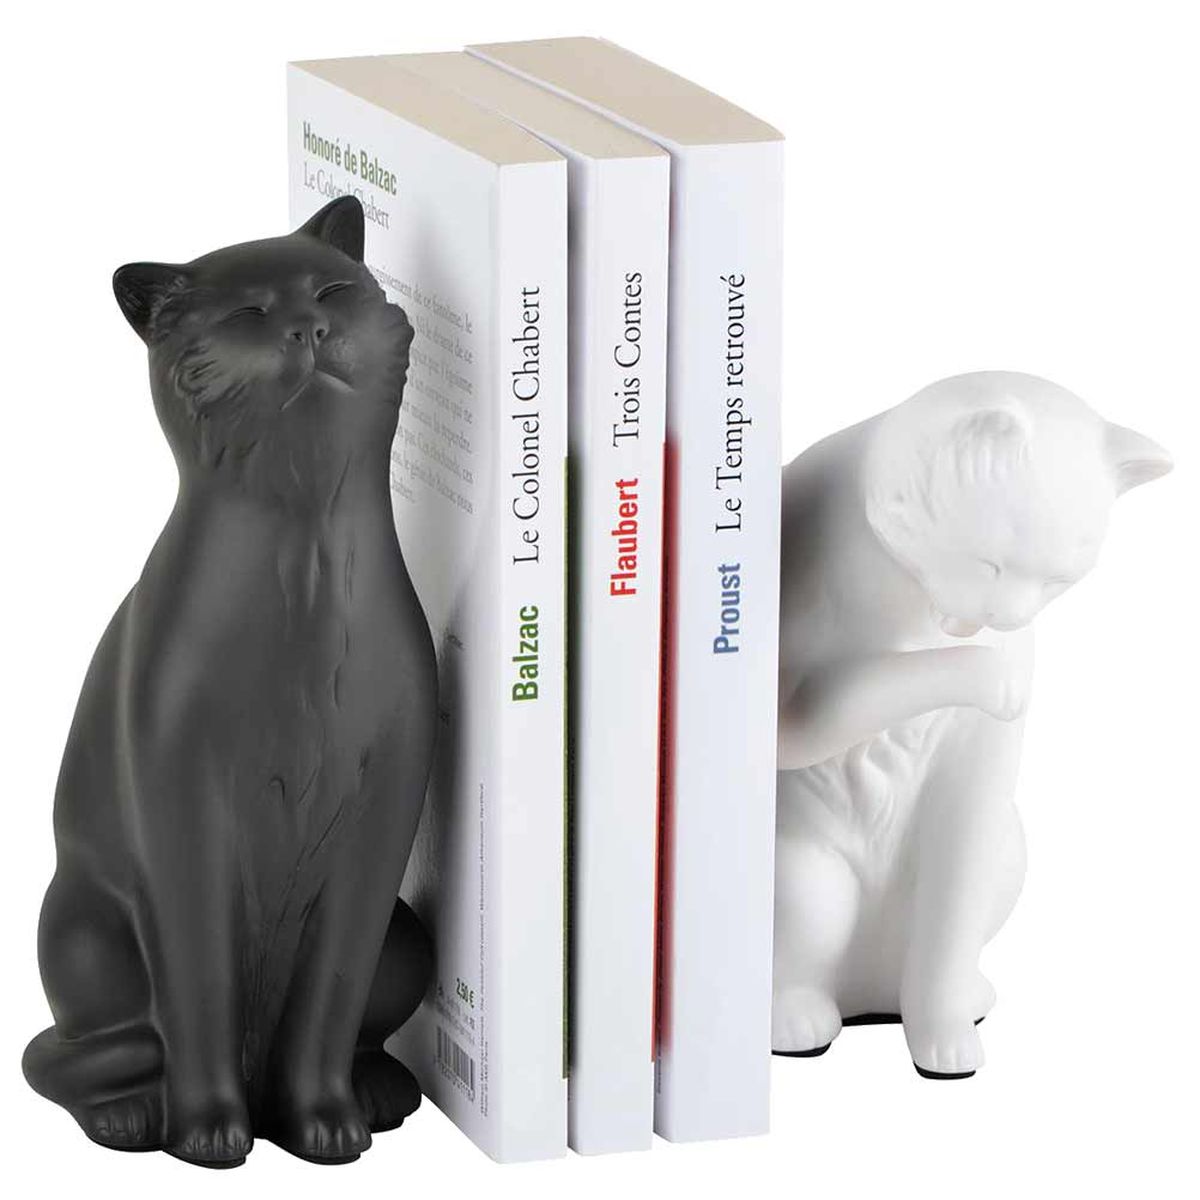 Stop cat-shaped books